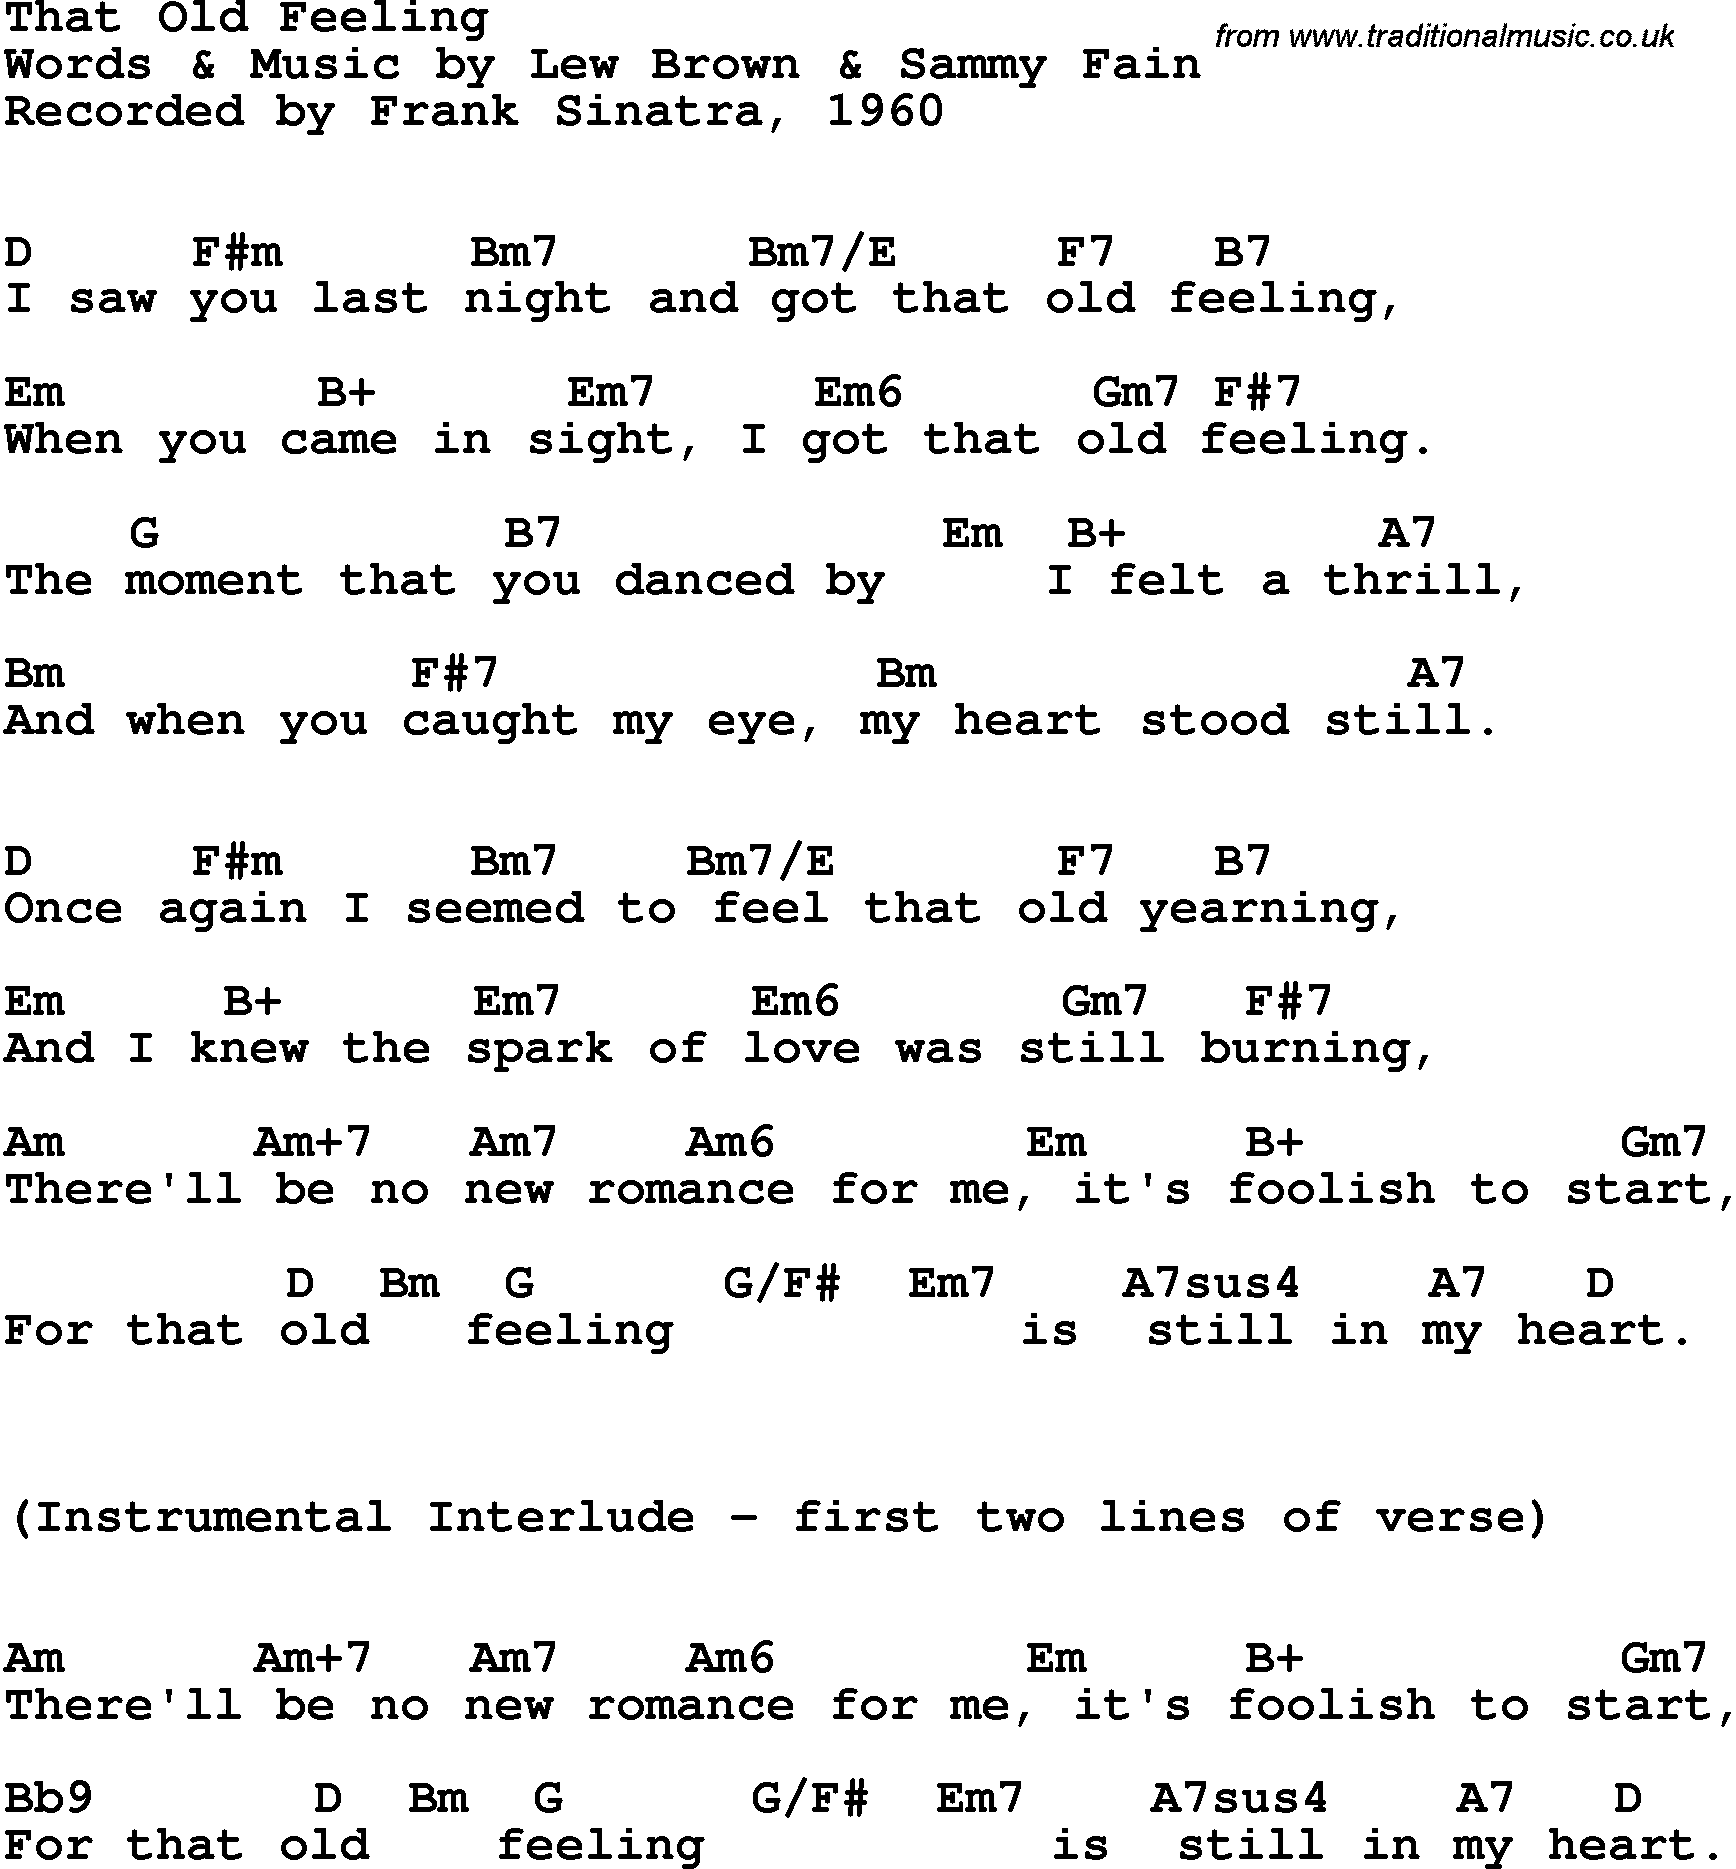 Song Lyrics with guitar chords for That Old Feeling - Frank Sinatra, 1960